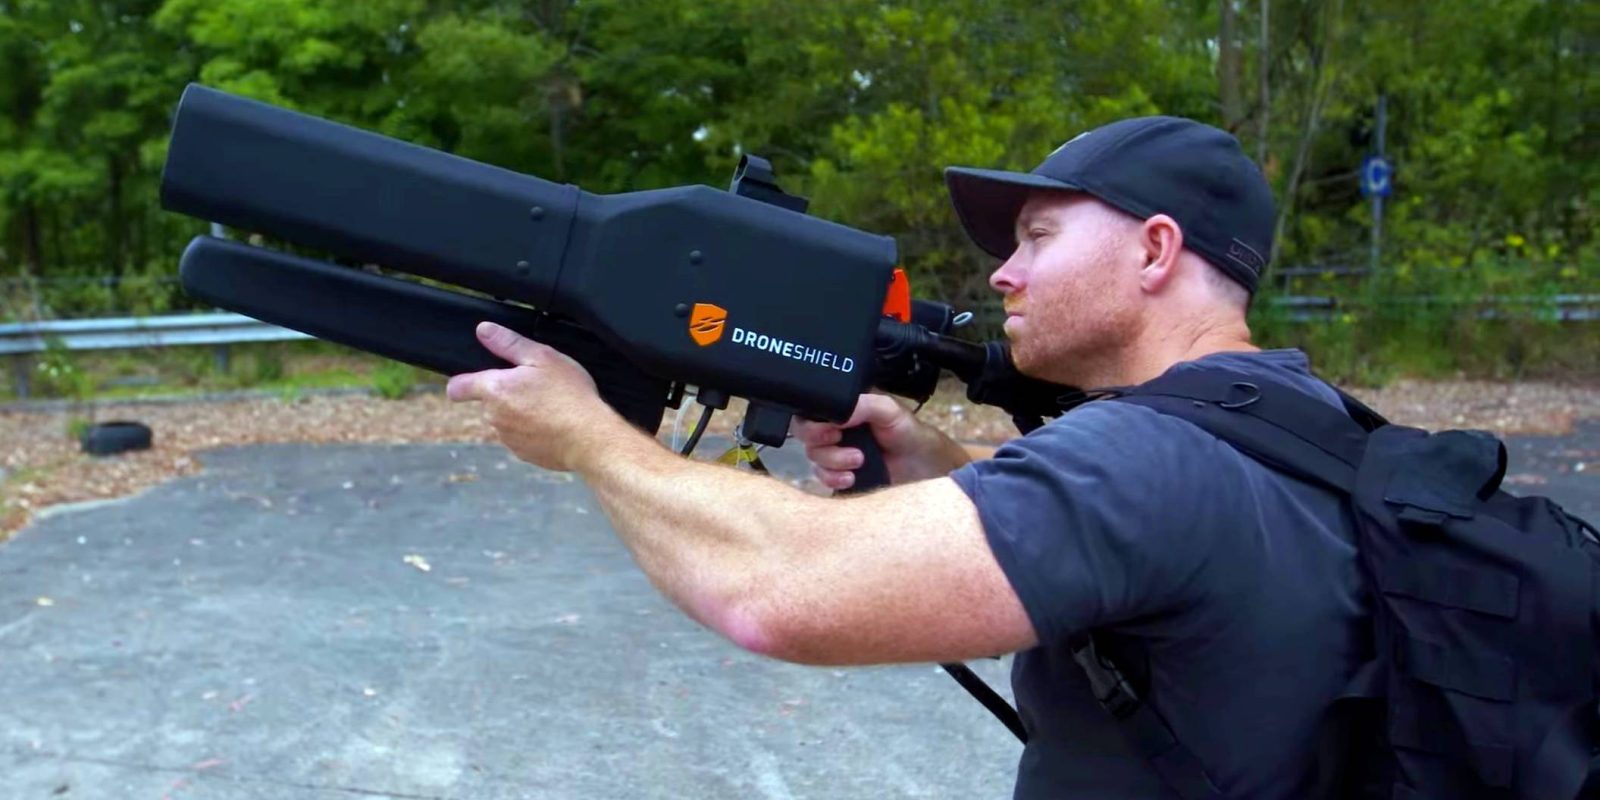 DroneShield will be protecting NASCAR